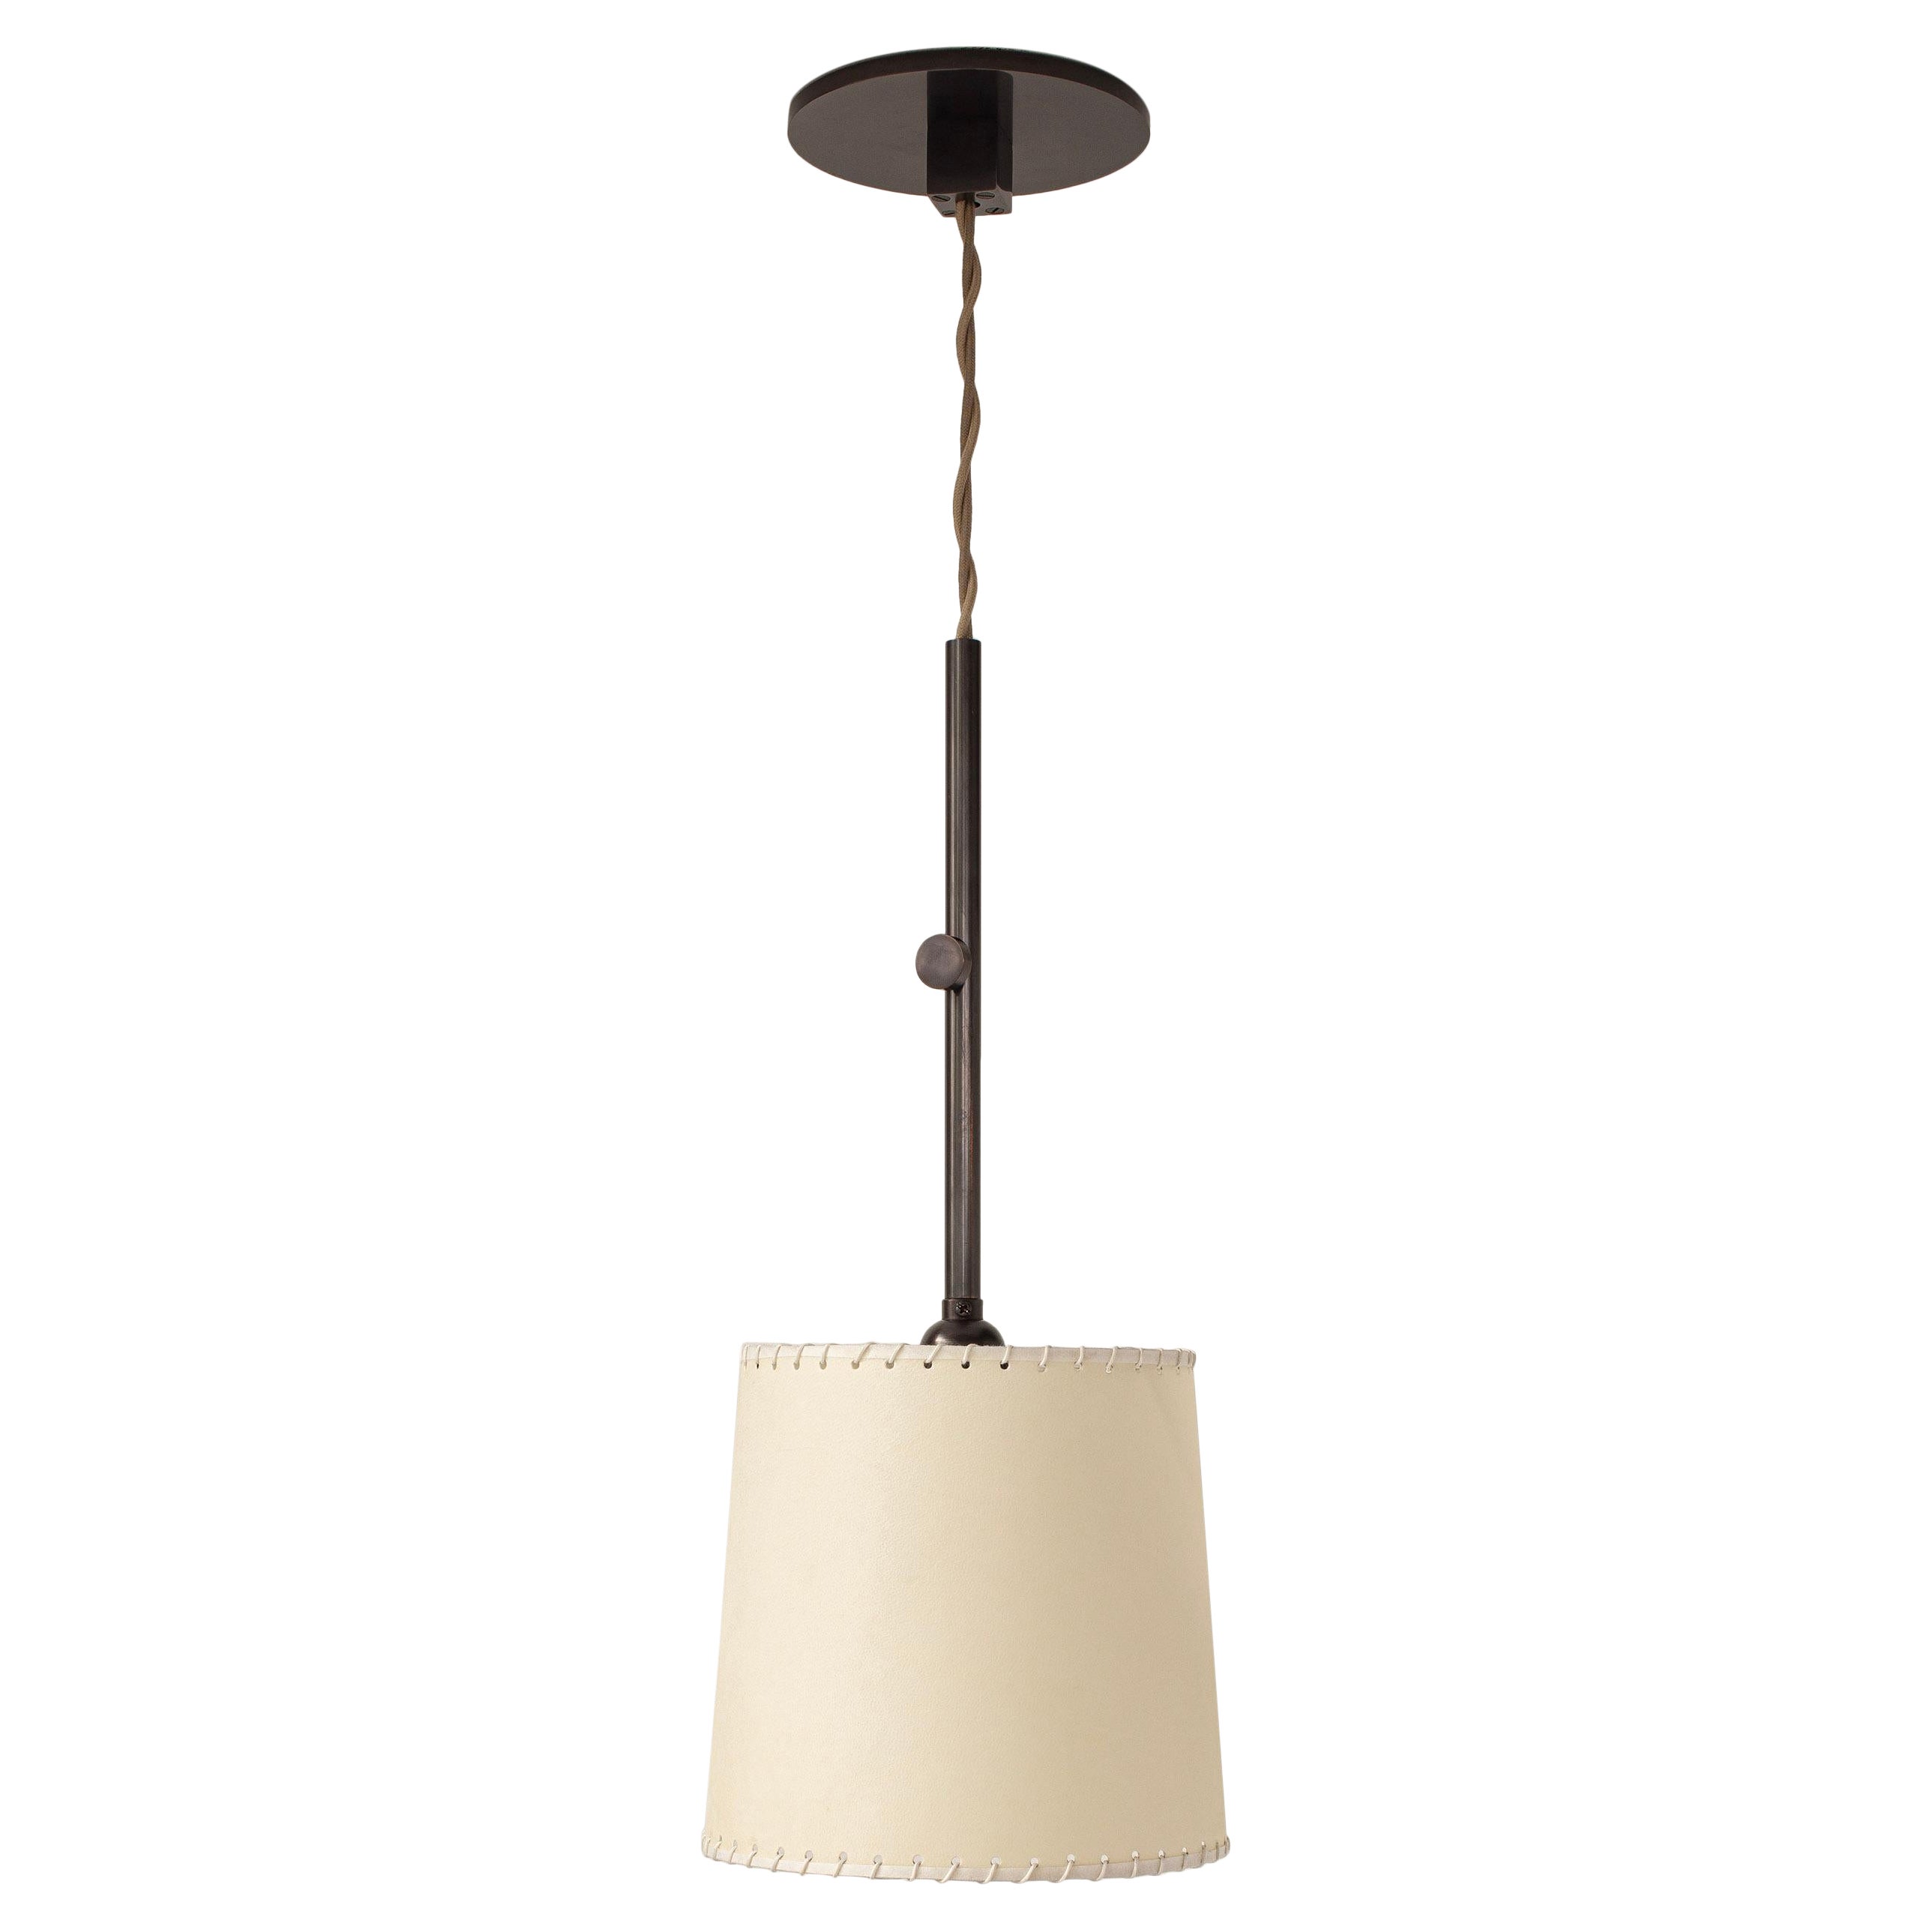 Series01 Sm Pendant, Dark Patinated Brass, Goatskin Parchment Shade For Sale